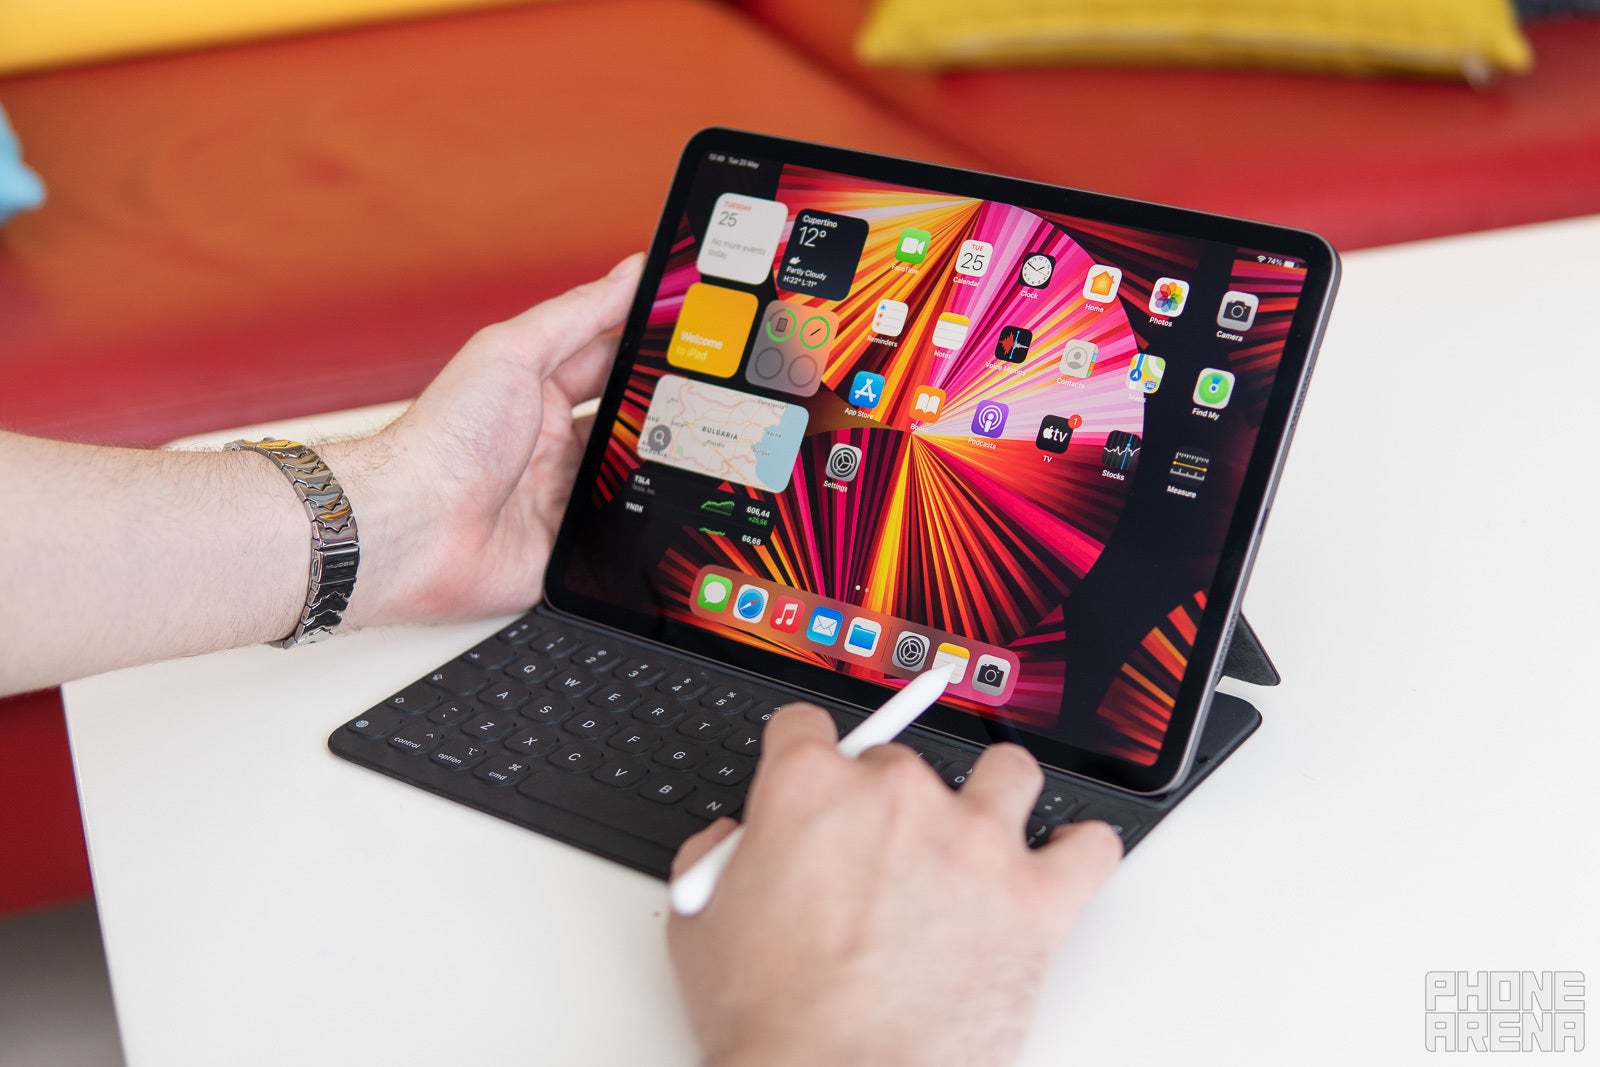 The iPad will never get macOS, this is why